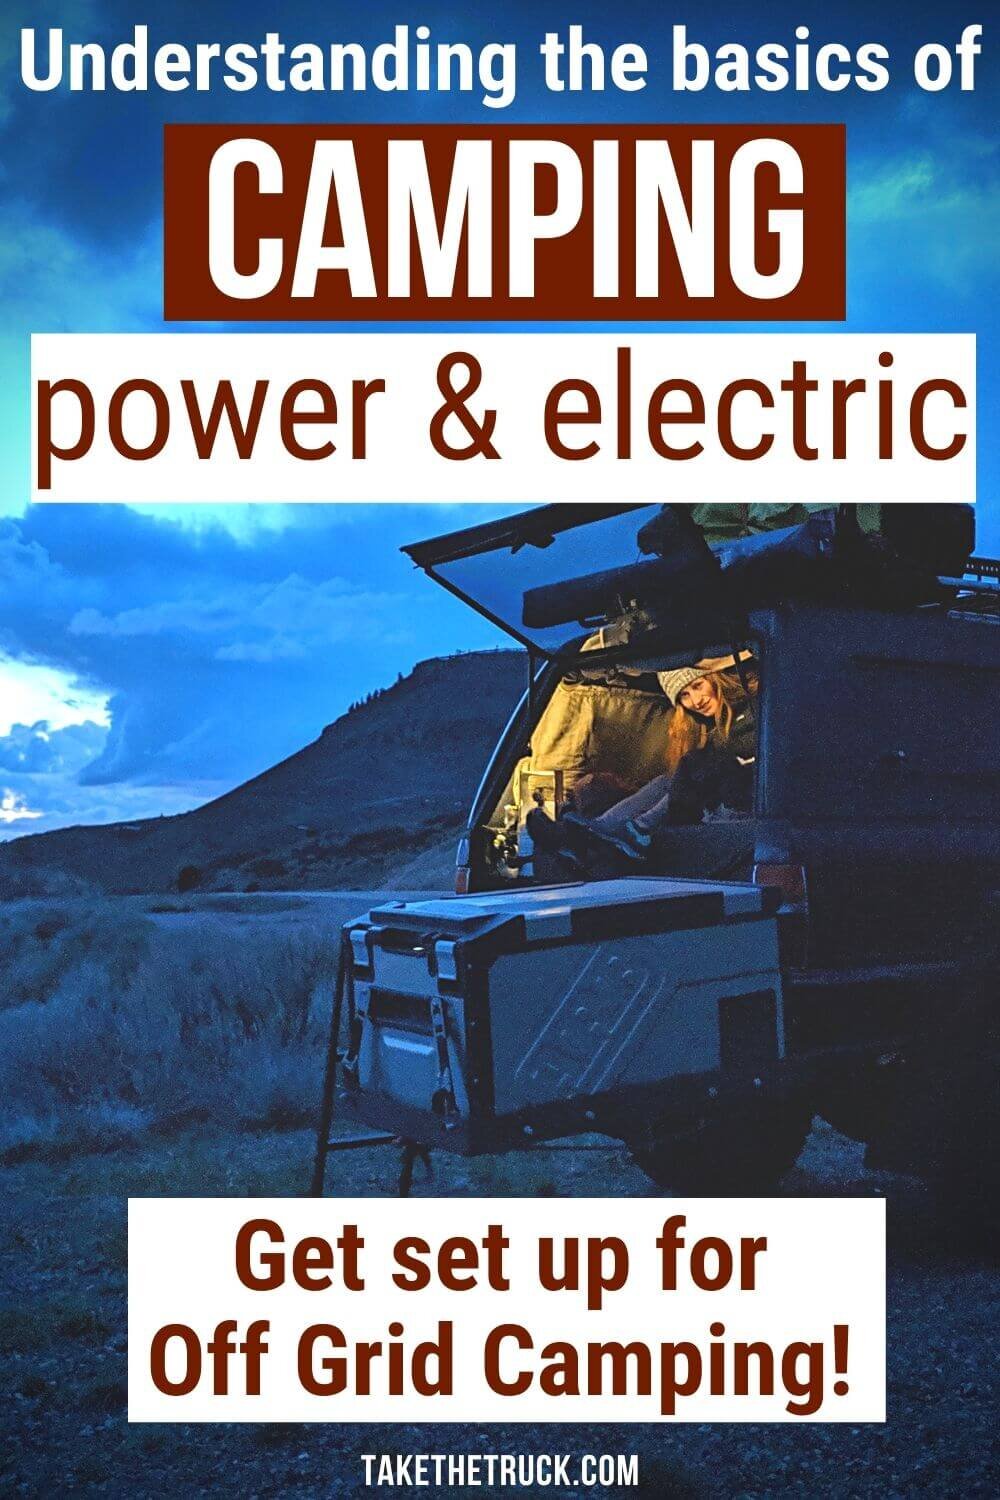 Camping power and electrical terms made easy to understand and apply to your van build, truck bed camper, or other camper - amps, watts, amp hours, watt hours, volts, AC and DC power.